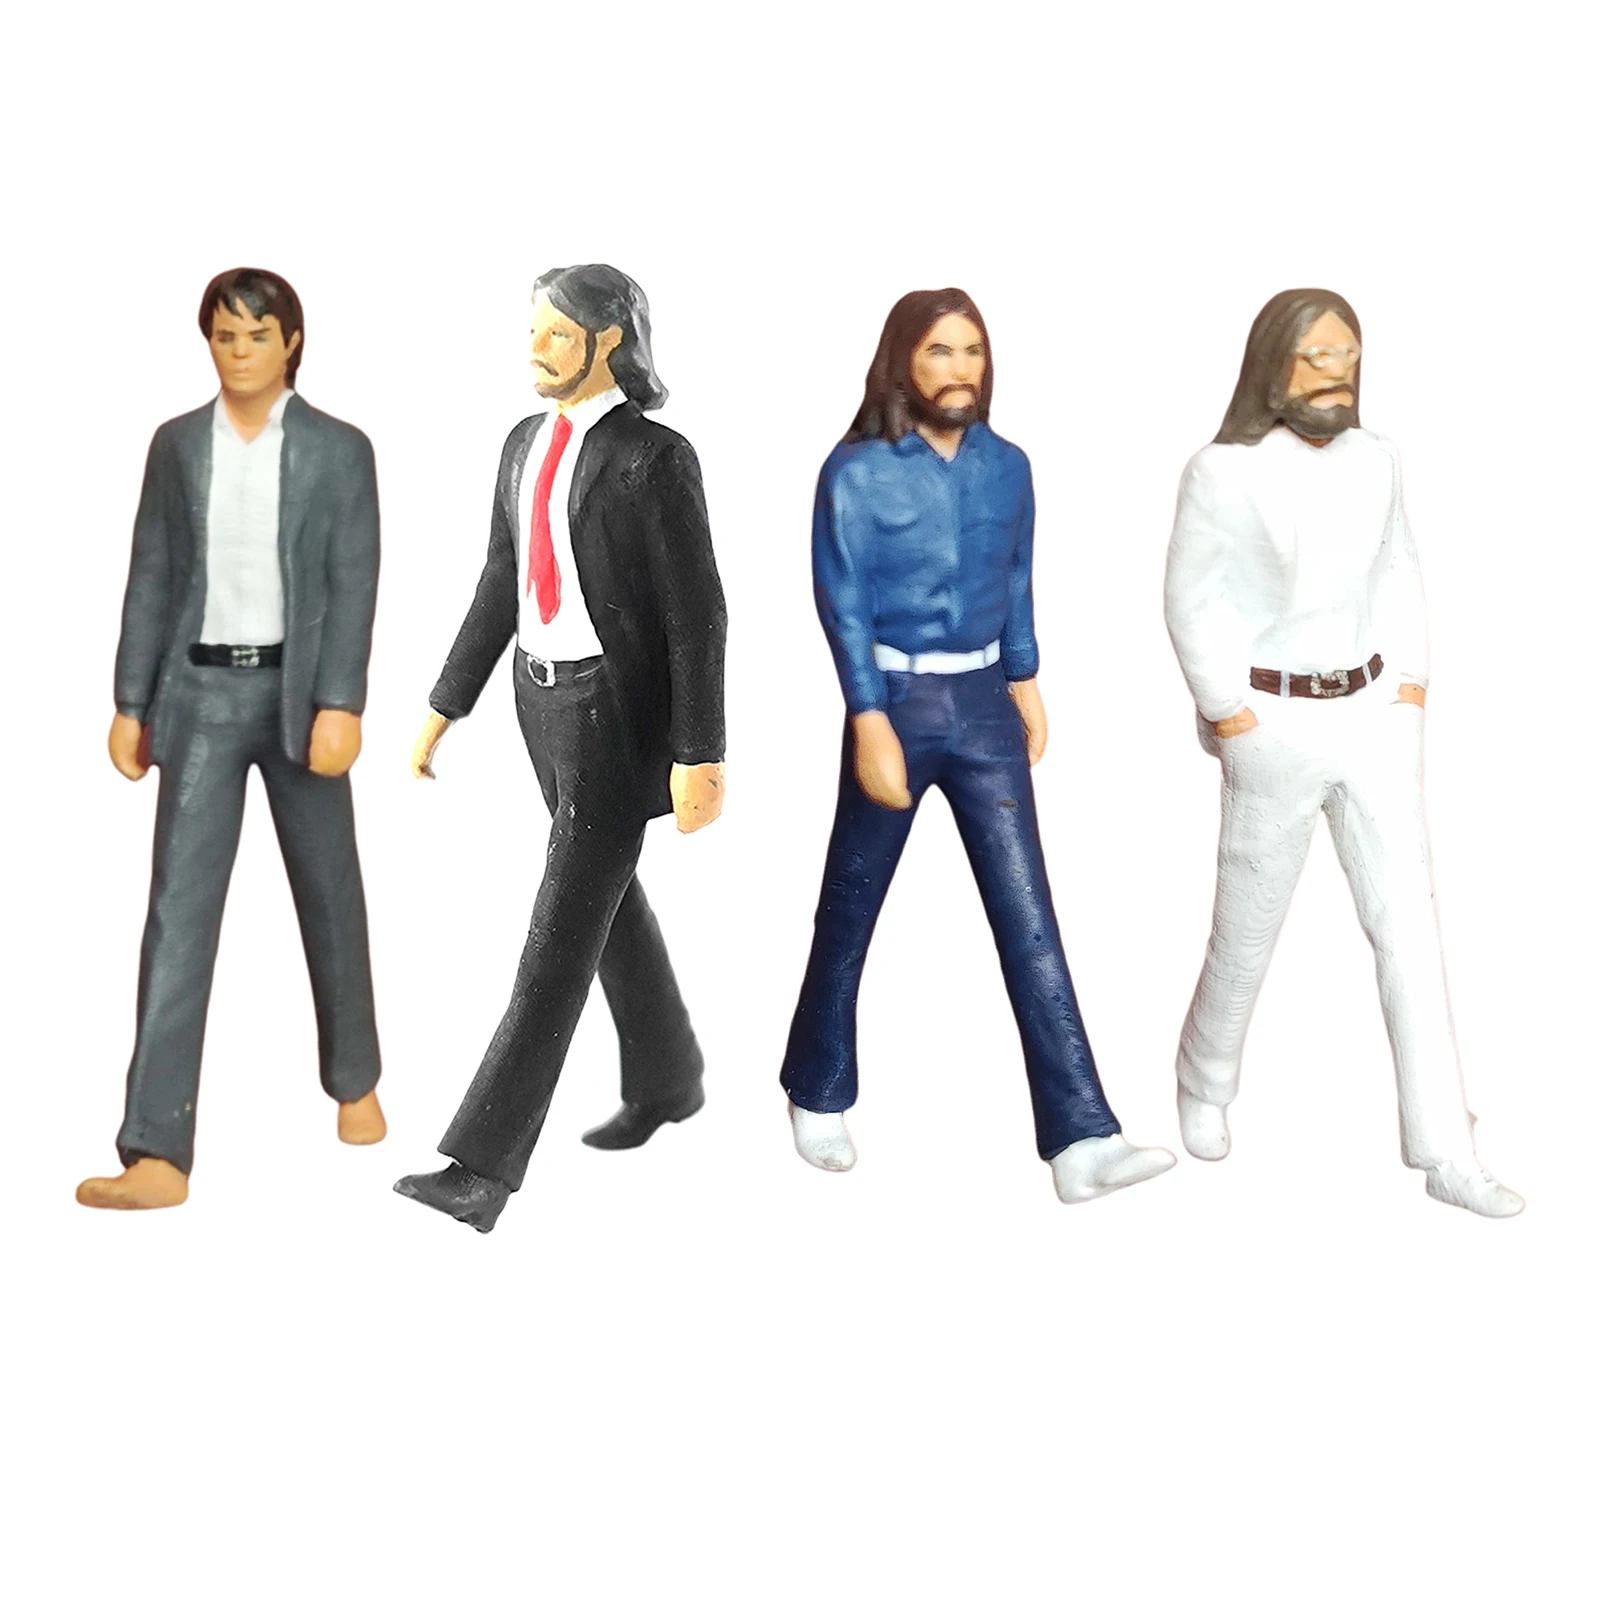 Resin Tiny 1/64 Character Diorama Cool Man Band Member Figures Model Train Road Buliding Layout Children Toy